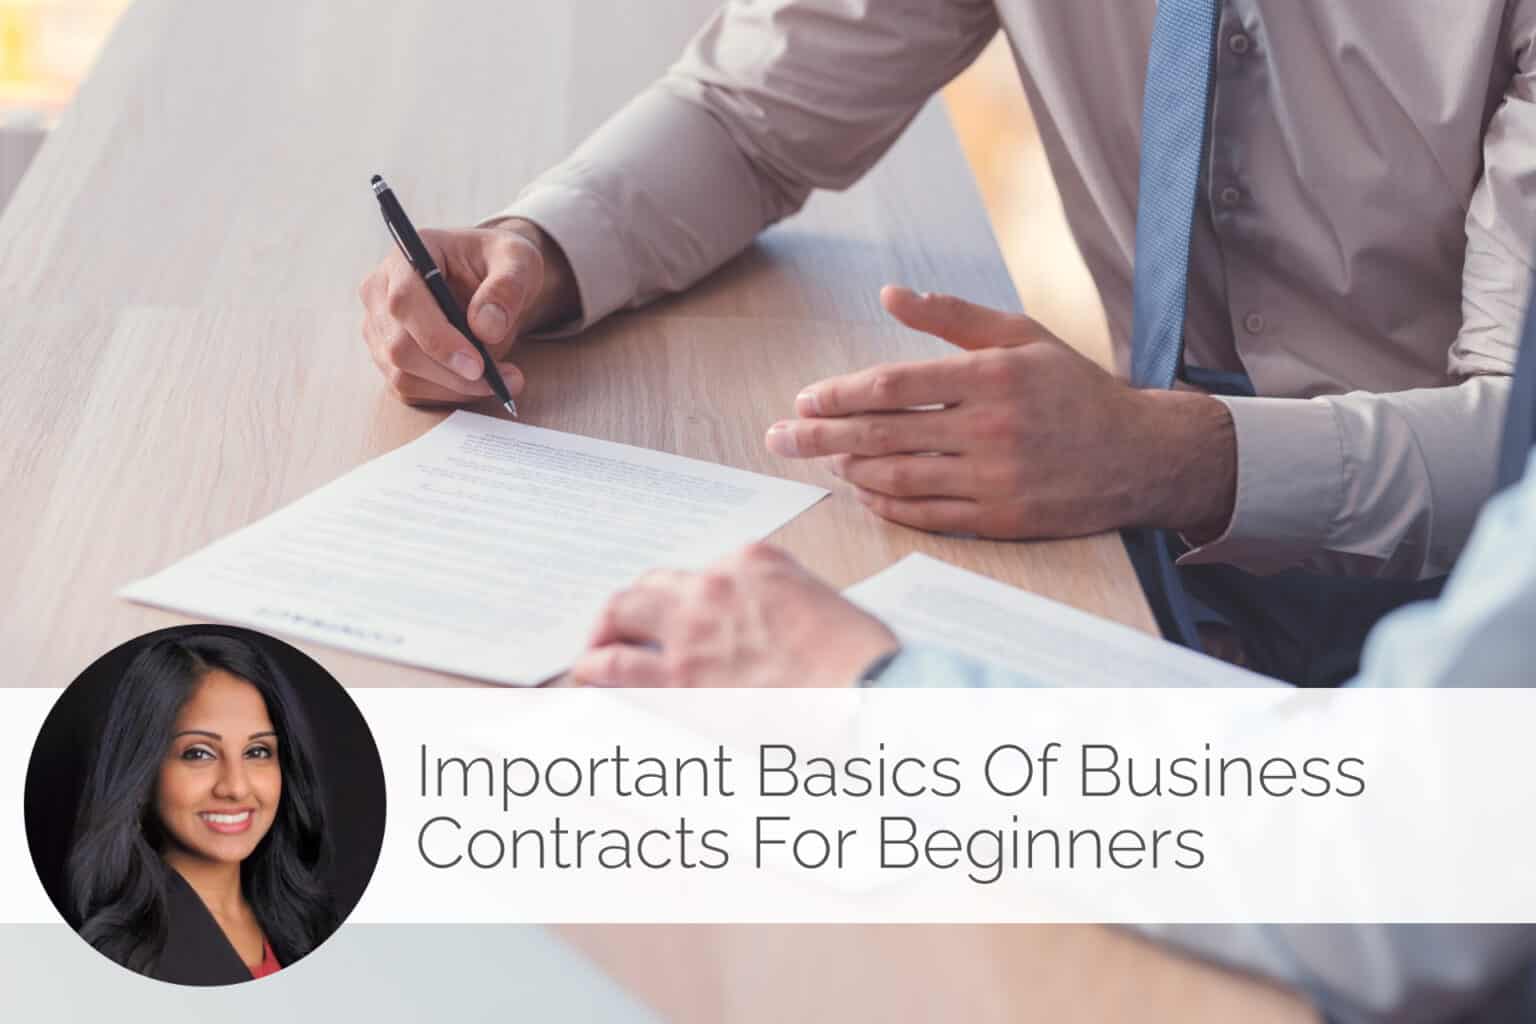 contracts, business, basics